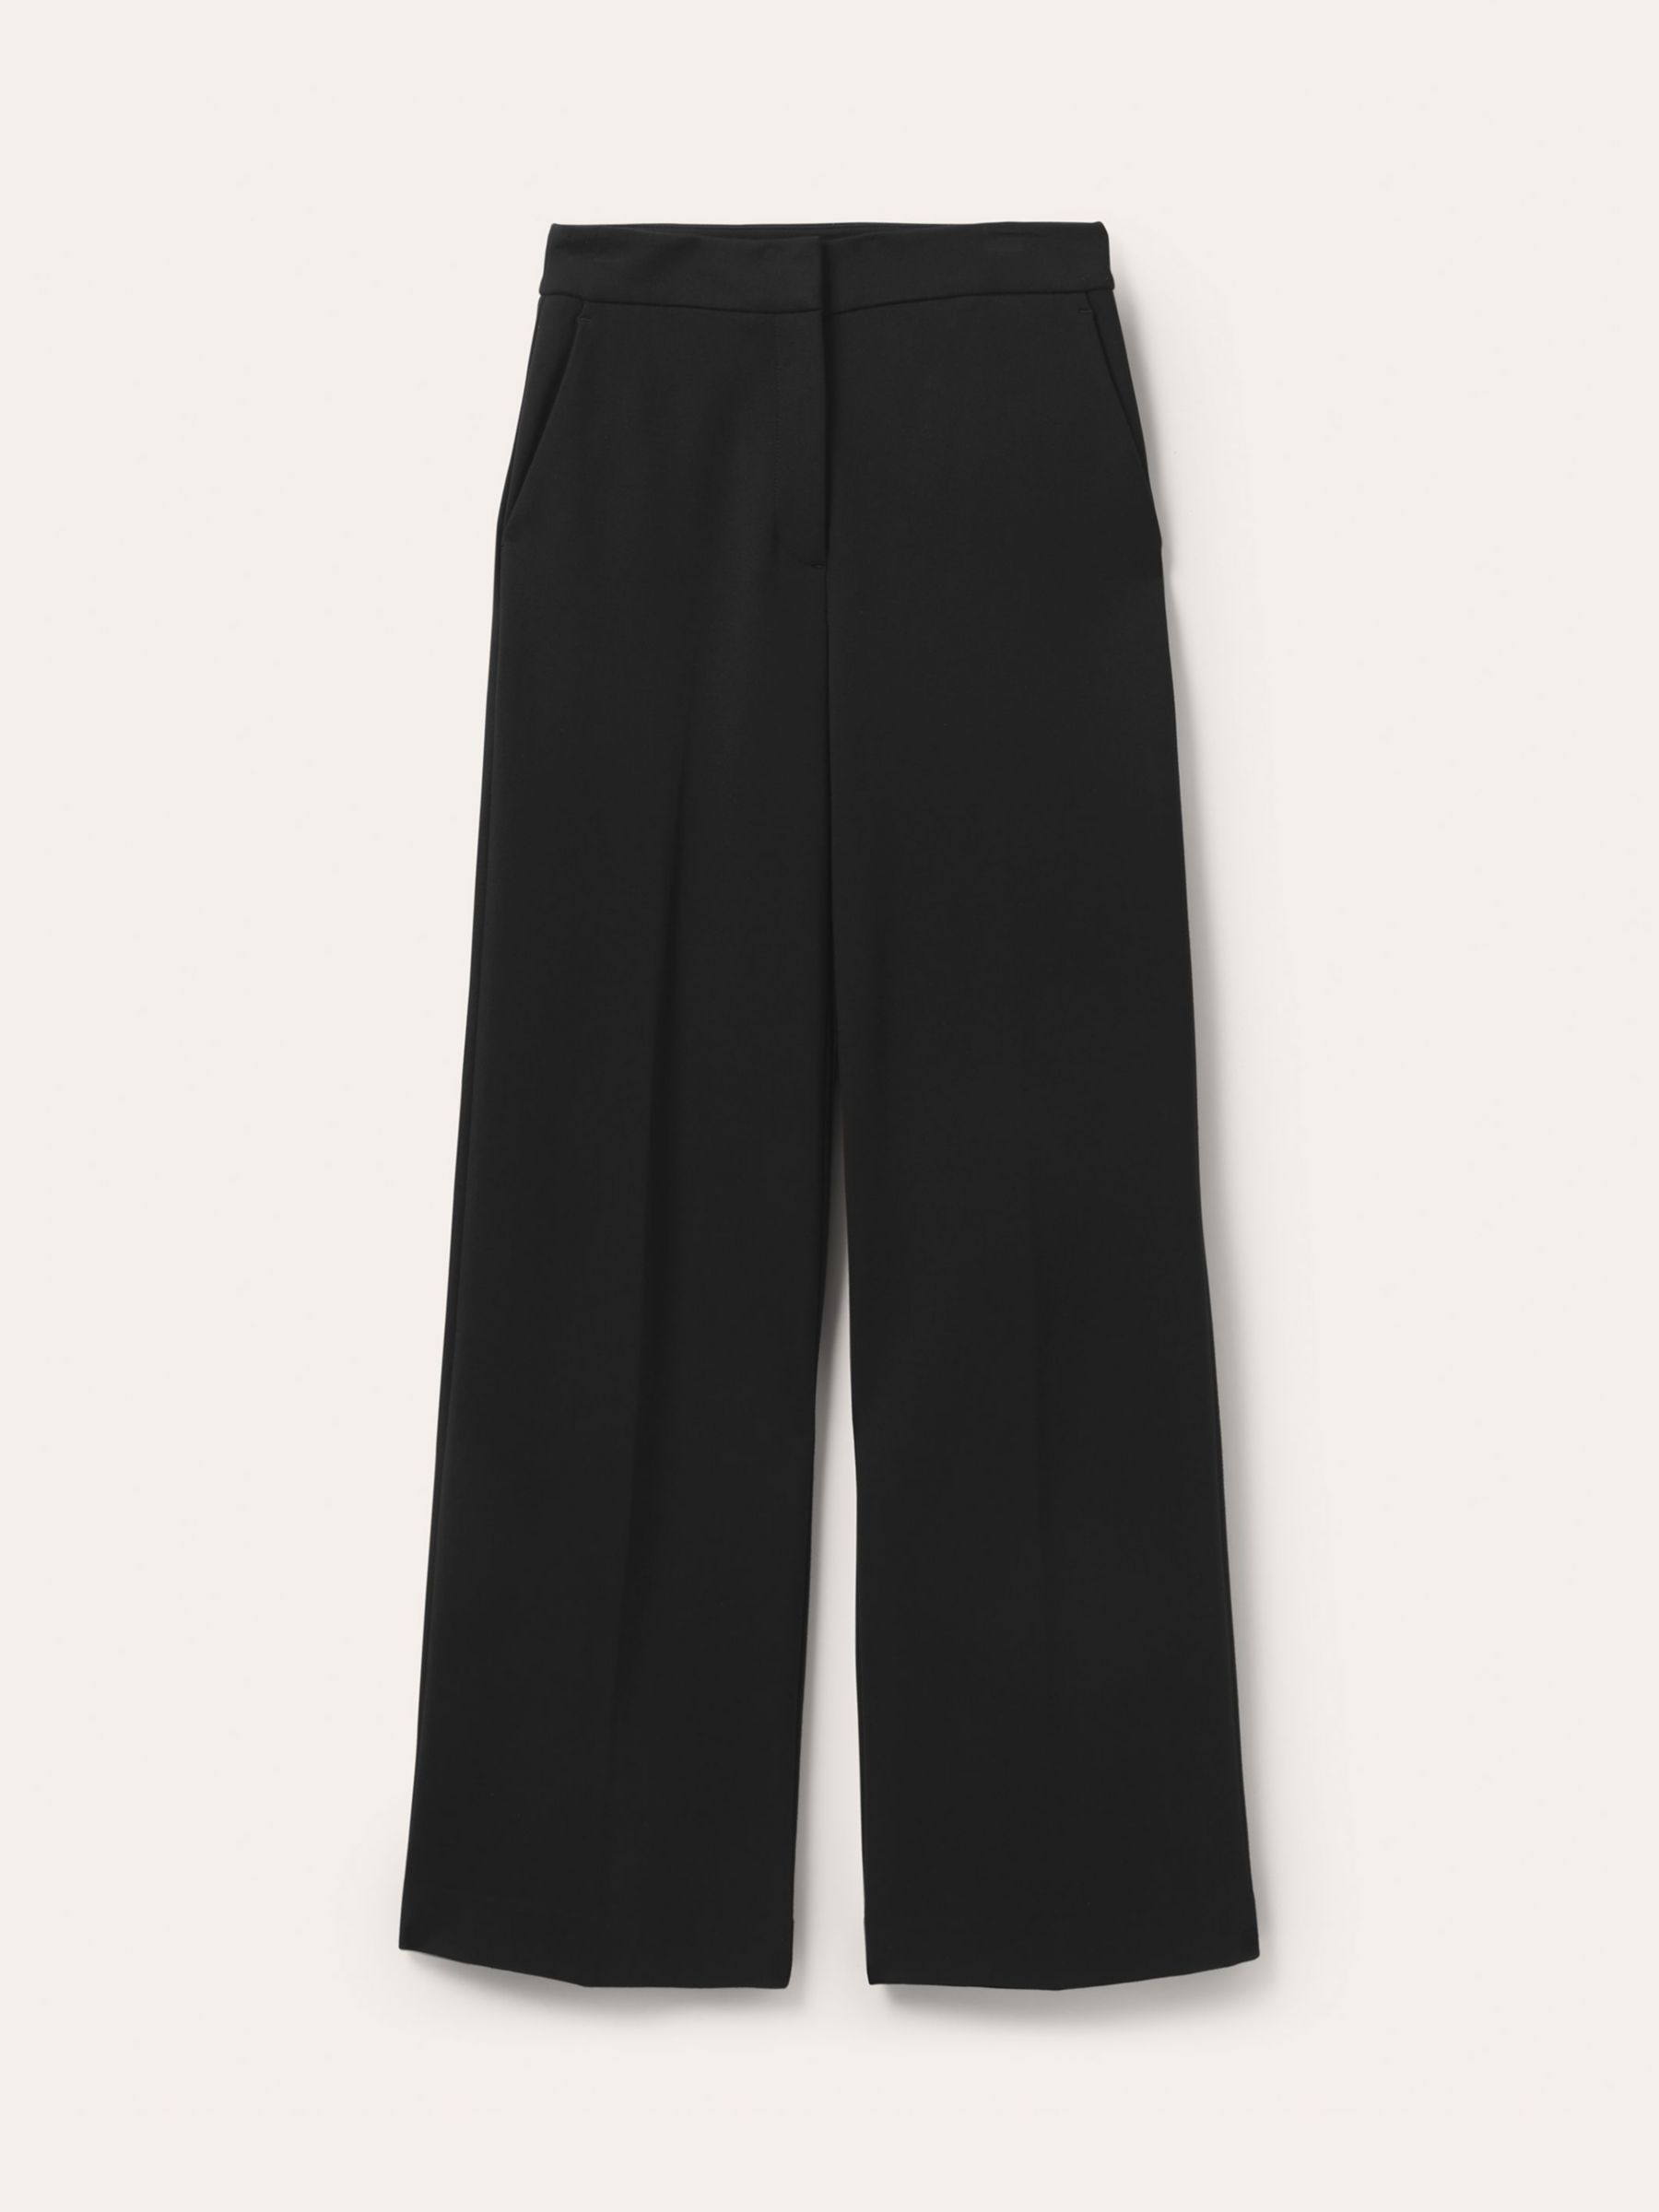 Boden Hampshire Ponte Trousers, Black at John Lewis & Partners